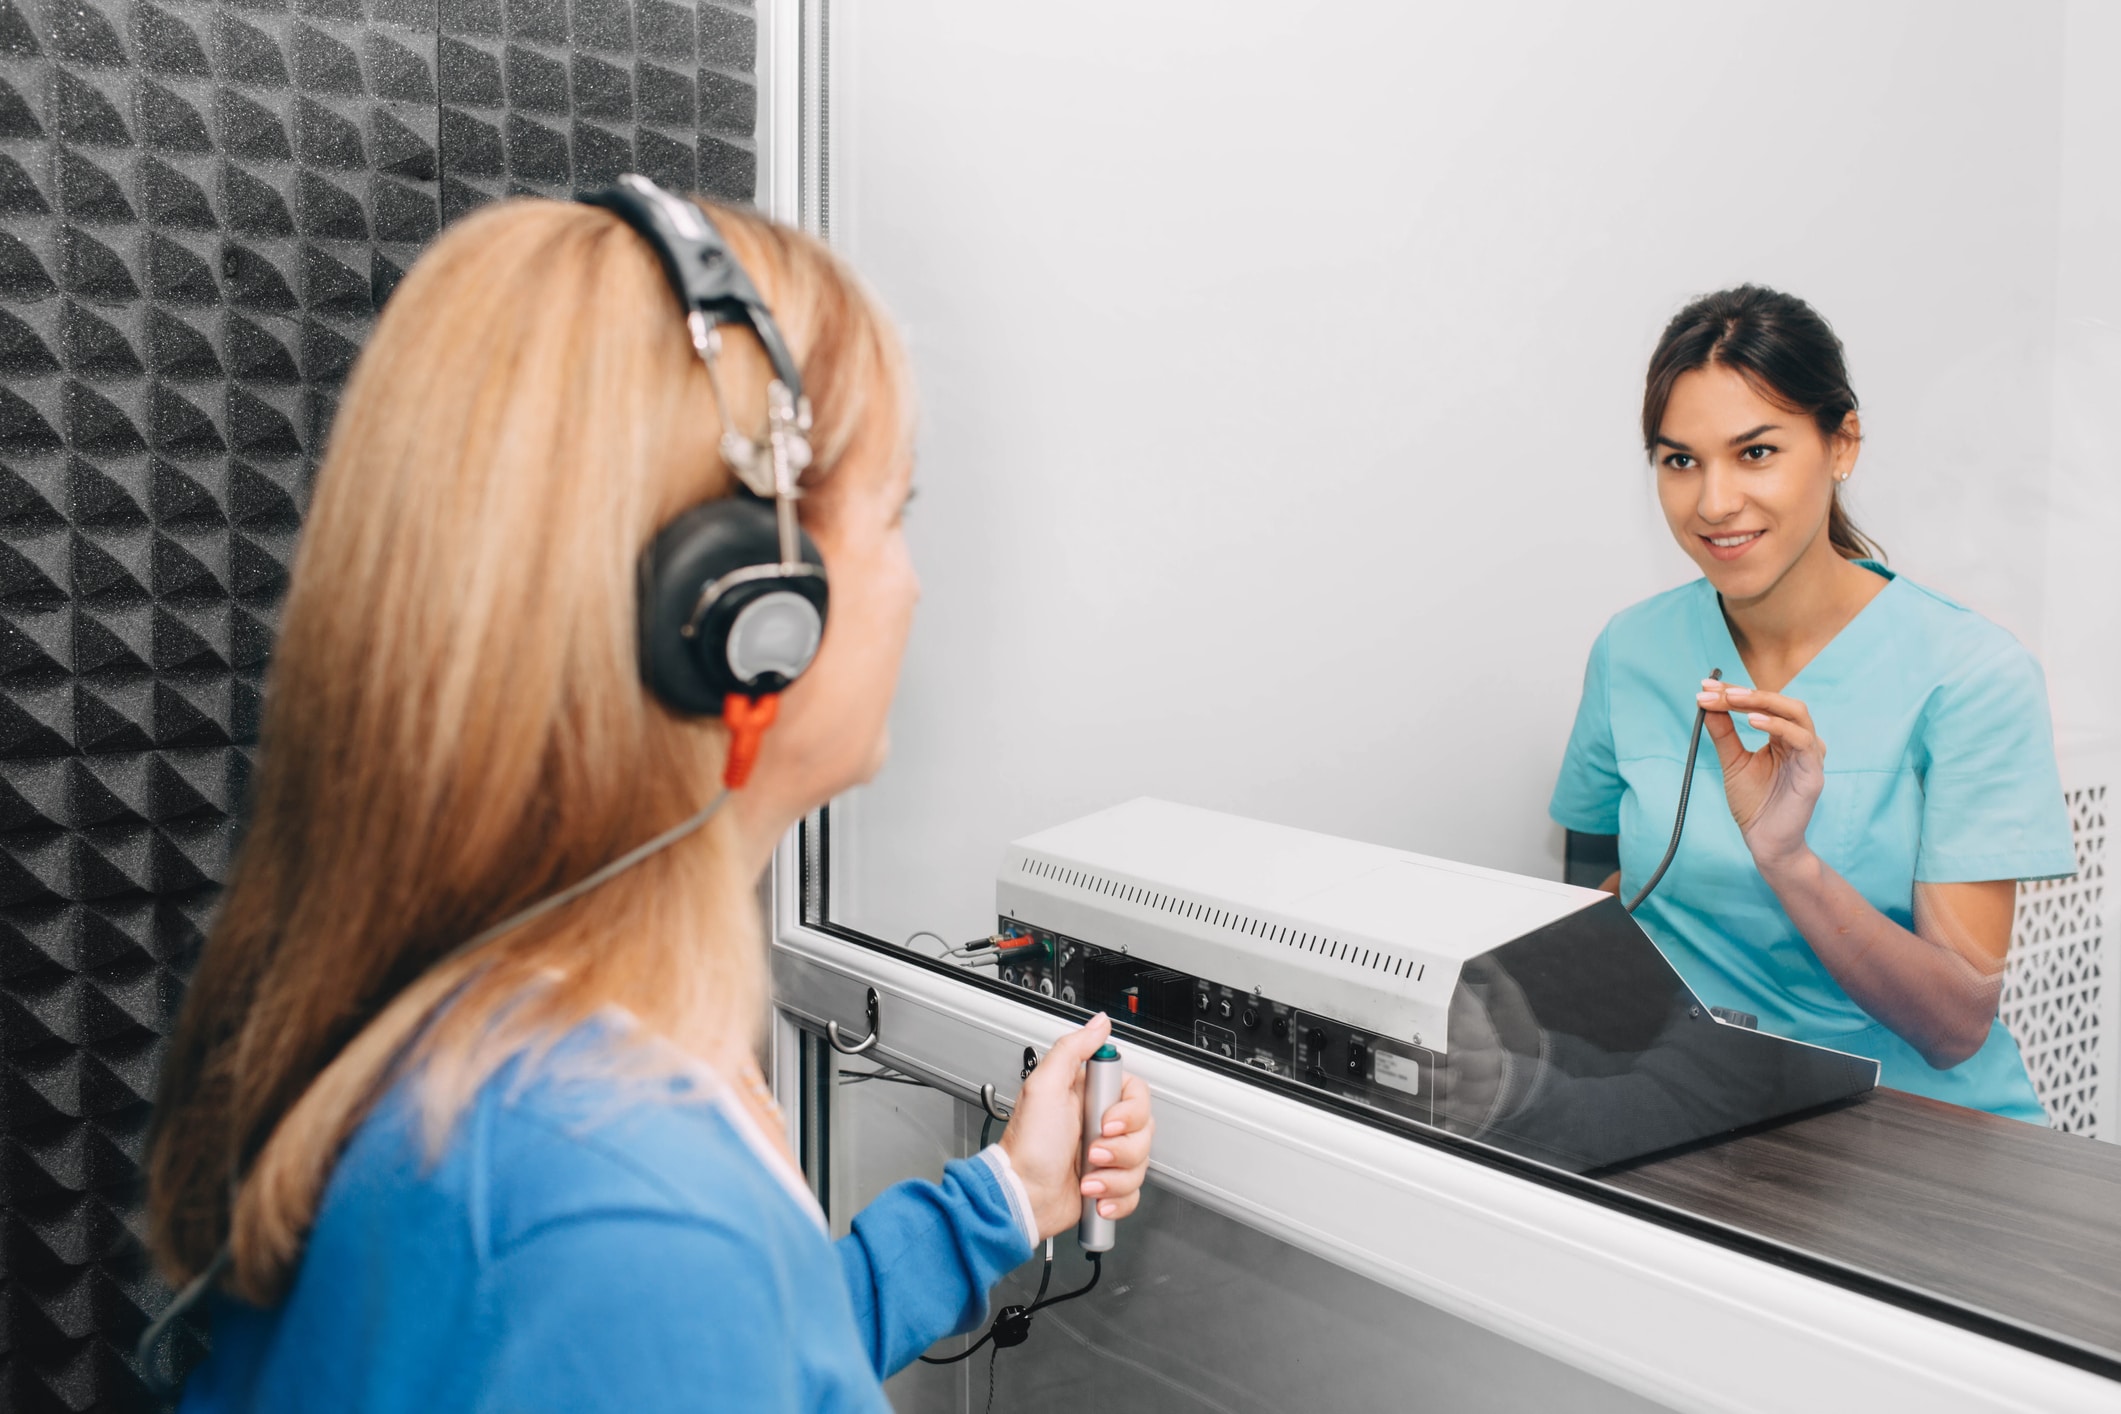 audiologist doing hearing exam to a mature patient using audiometer in special audio room.